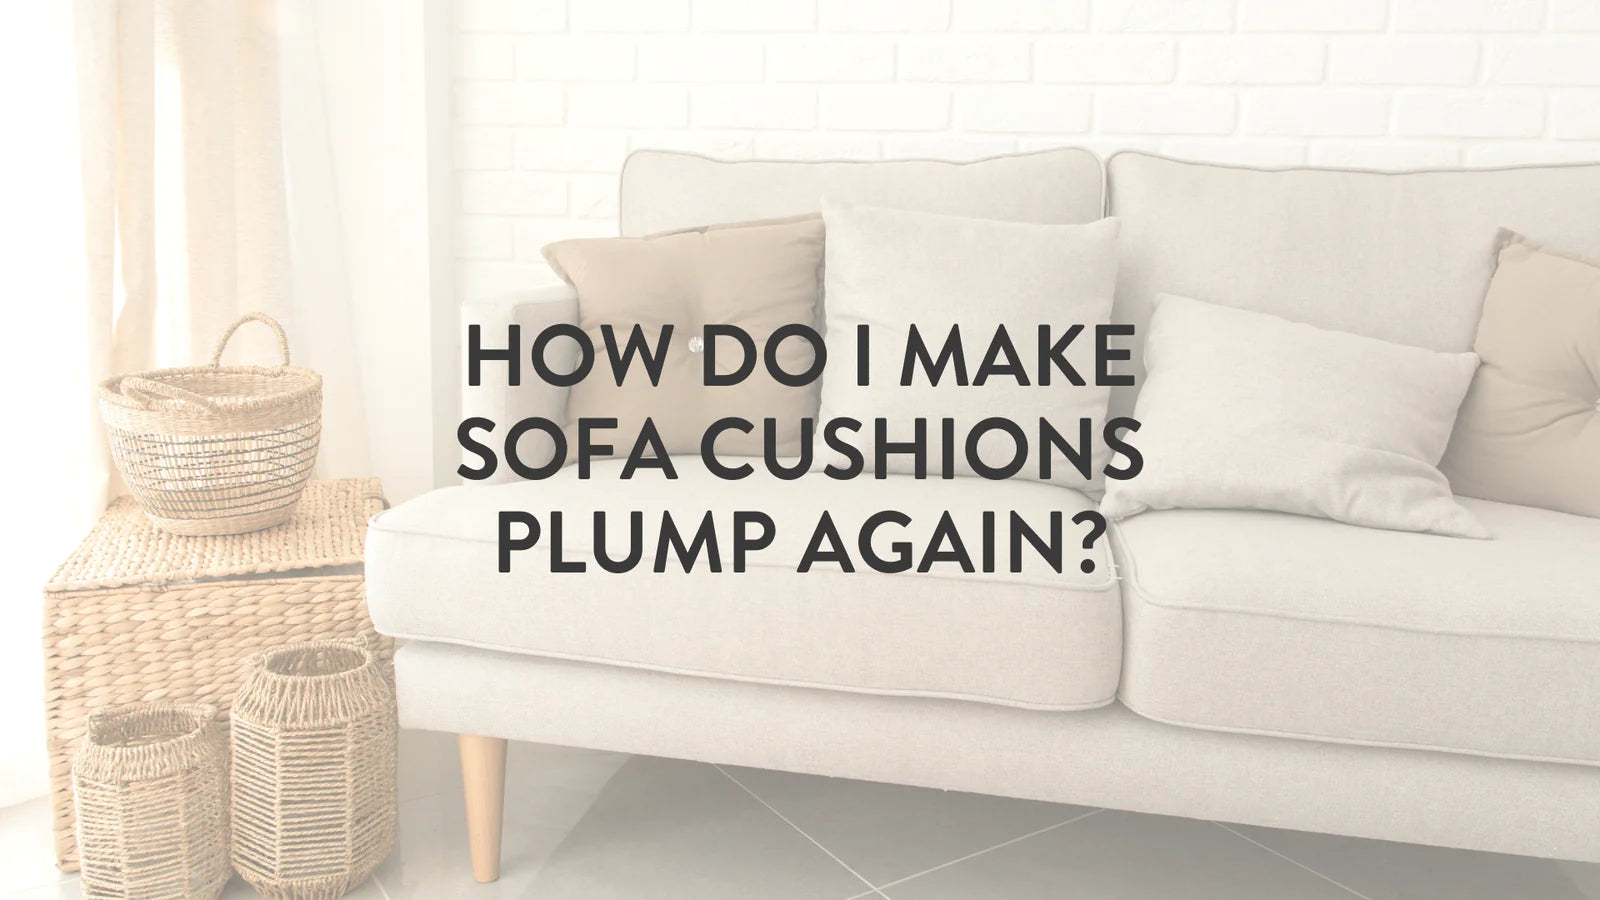 How to plump up your sofa cushions